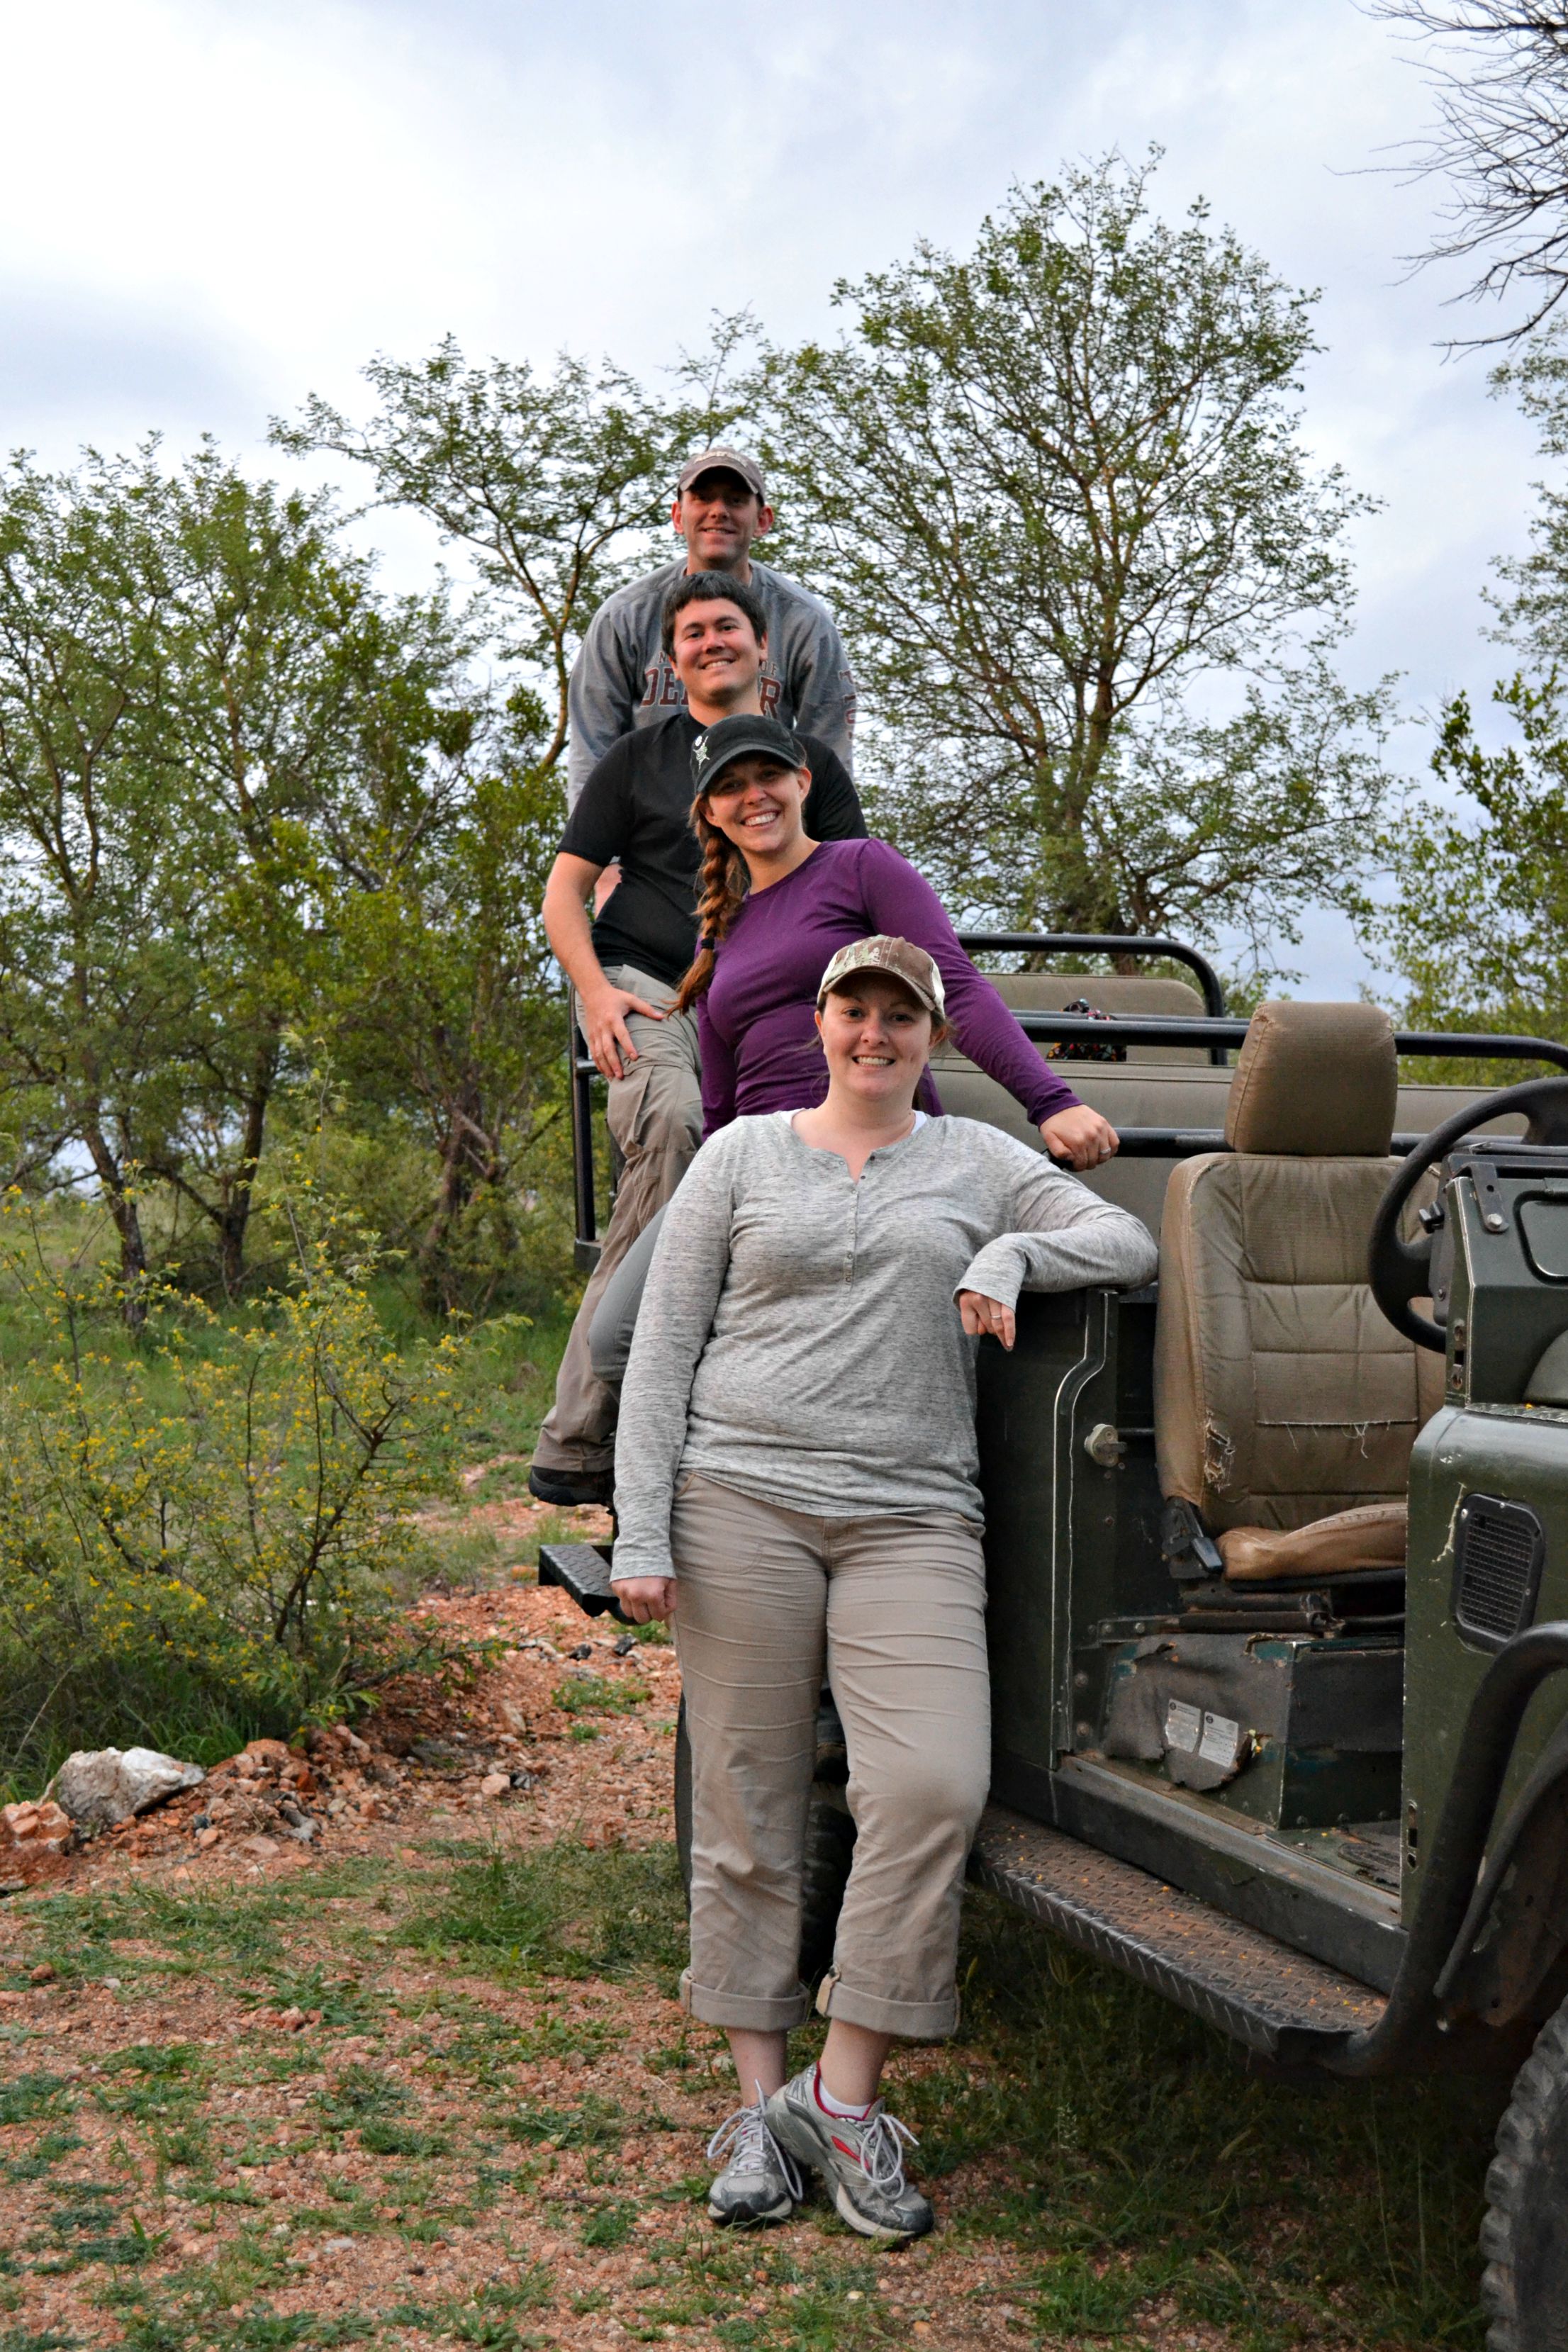 On a Safari in South Africa, one of our many trips with our friends